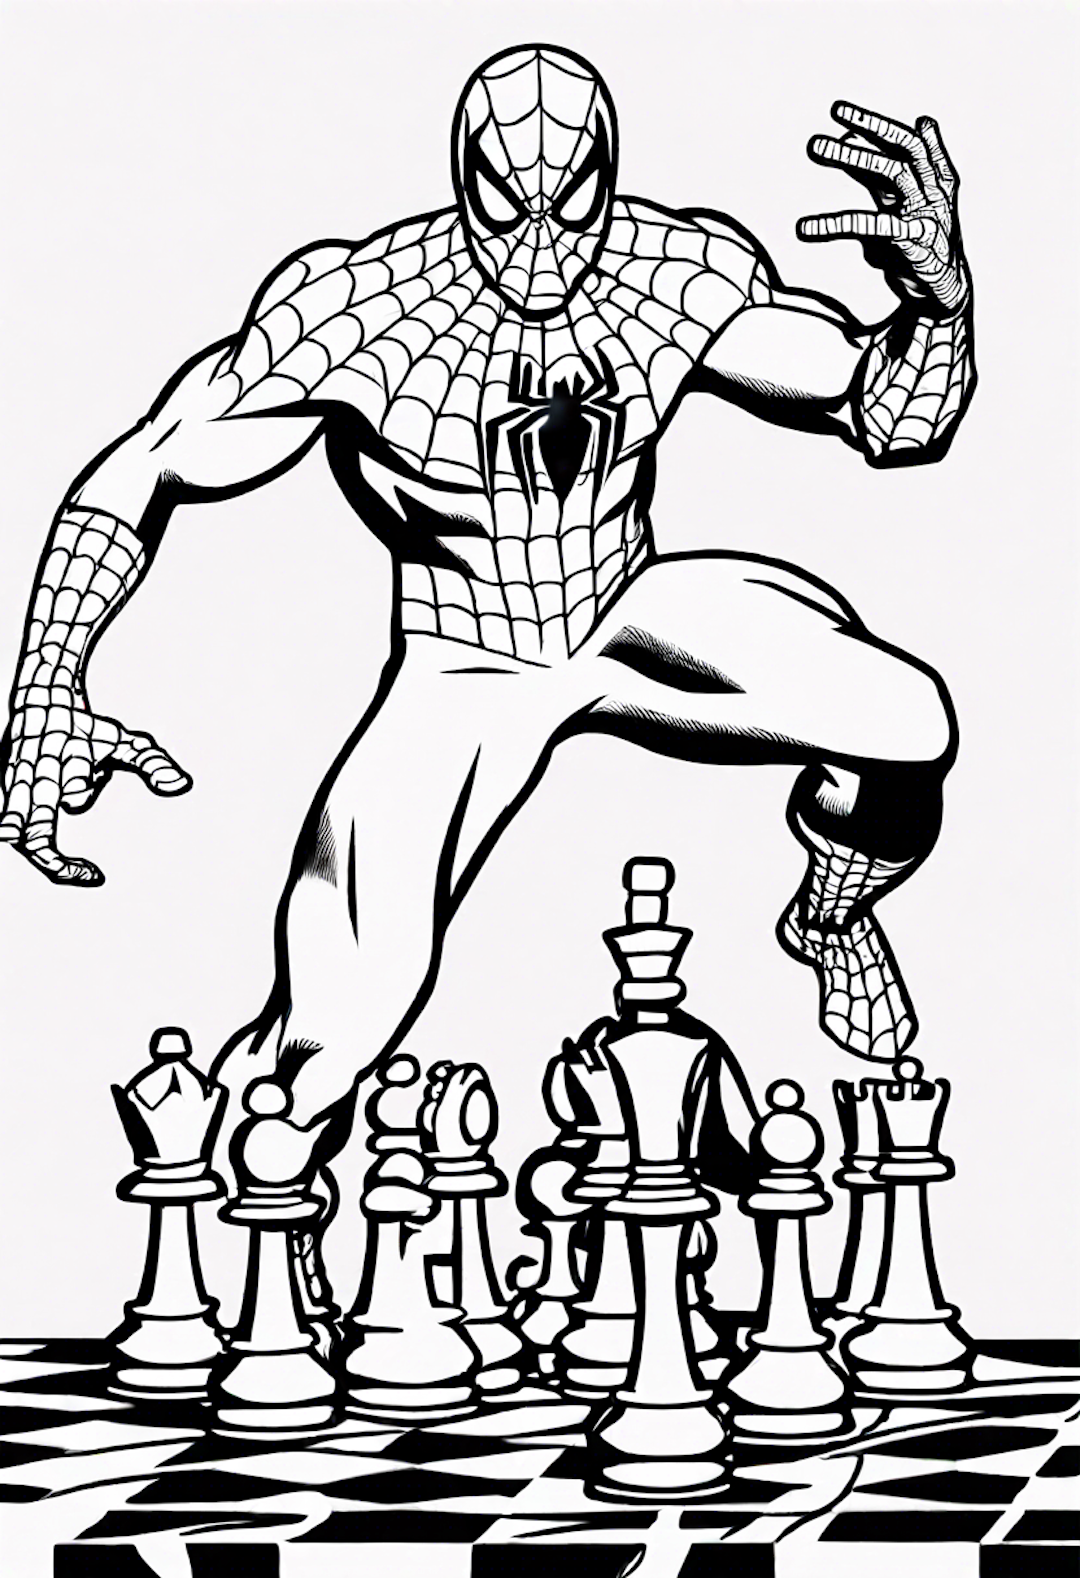 Spiderman In A Chess Match With Magneto